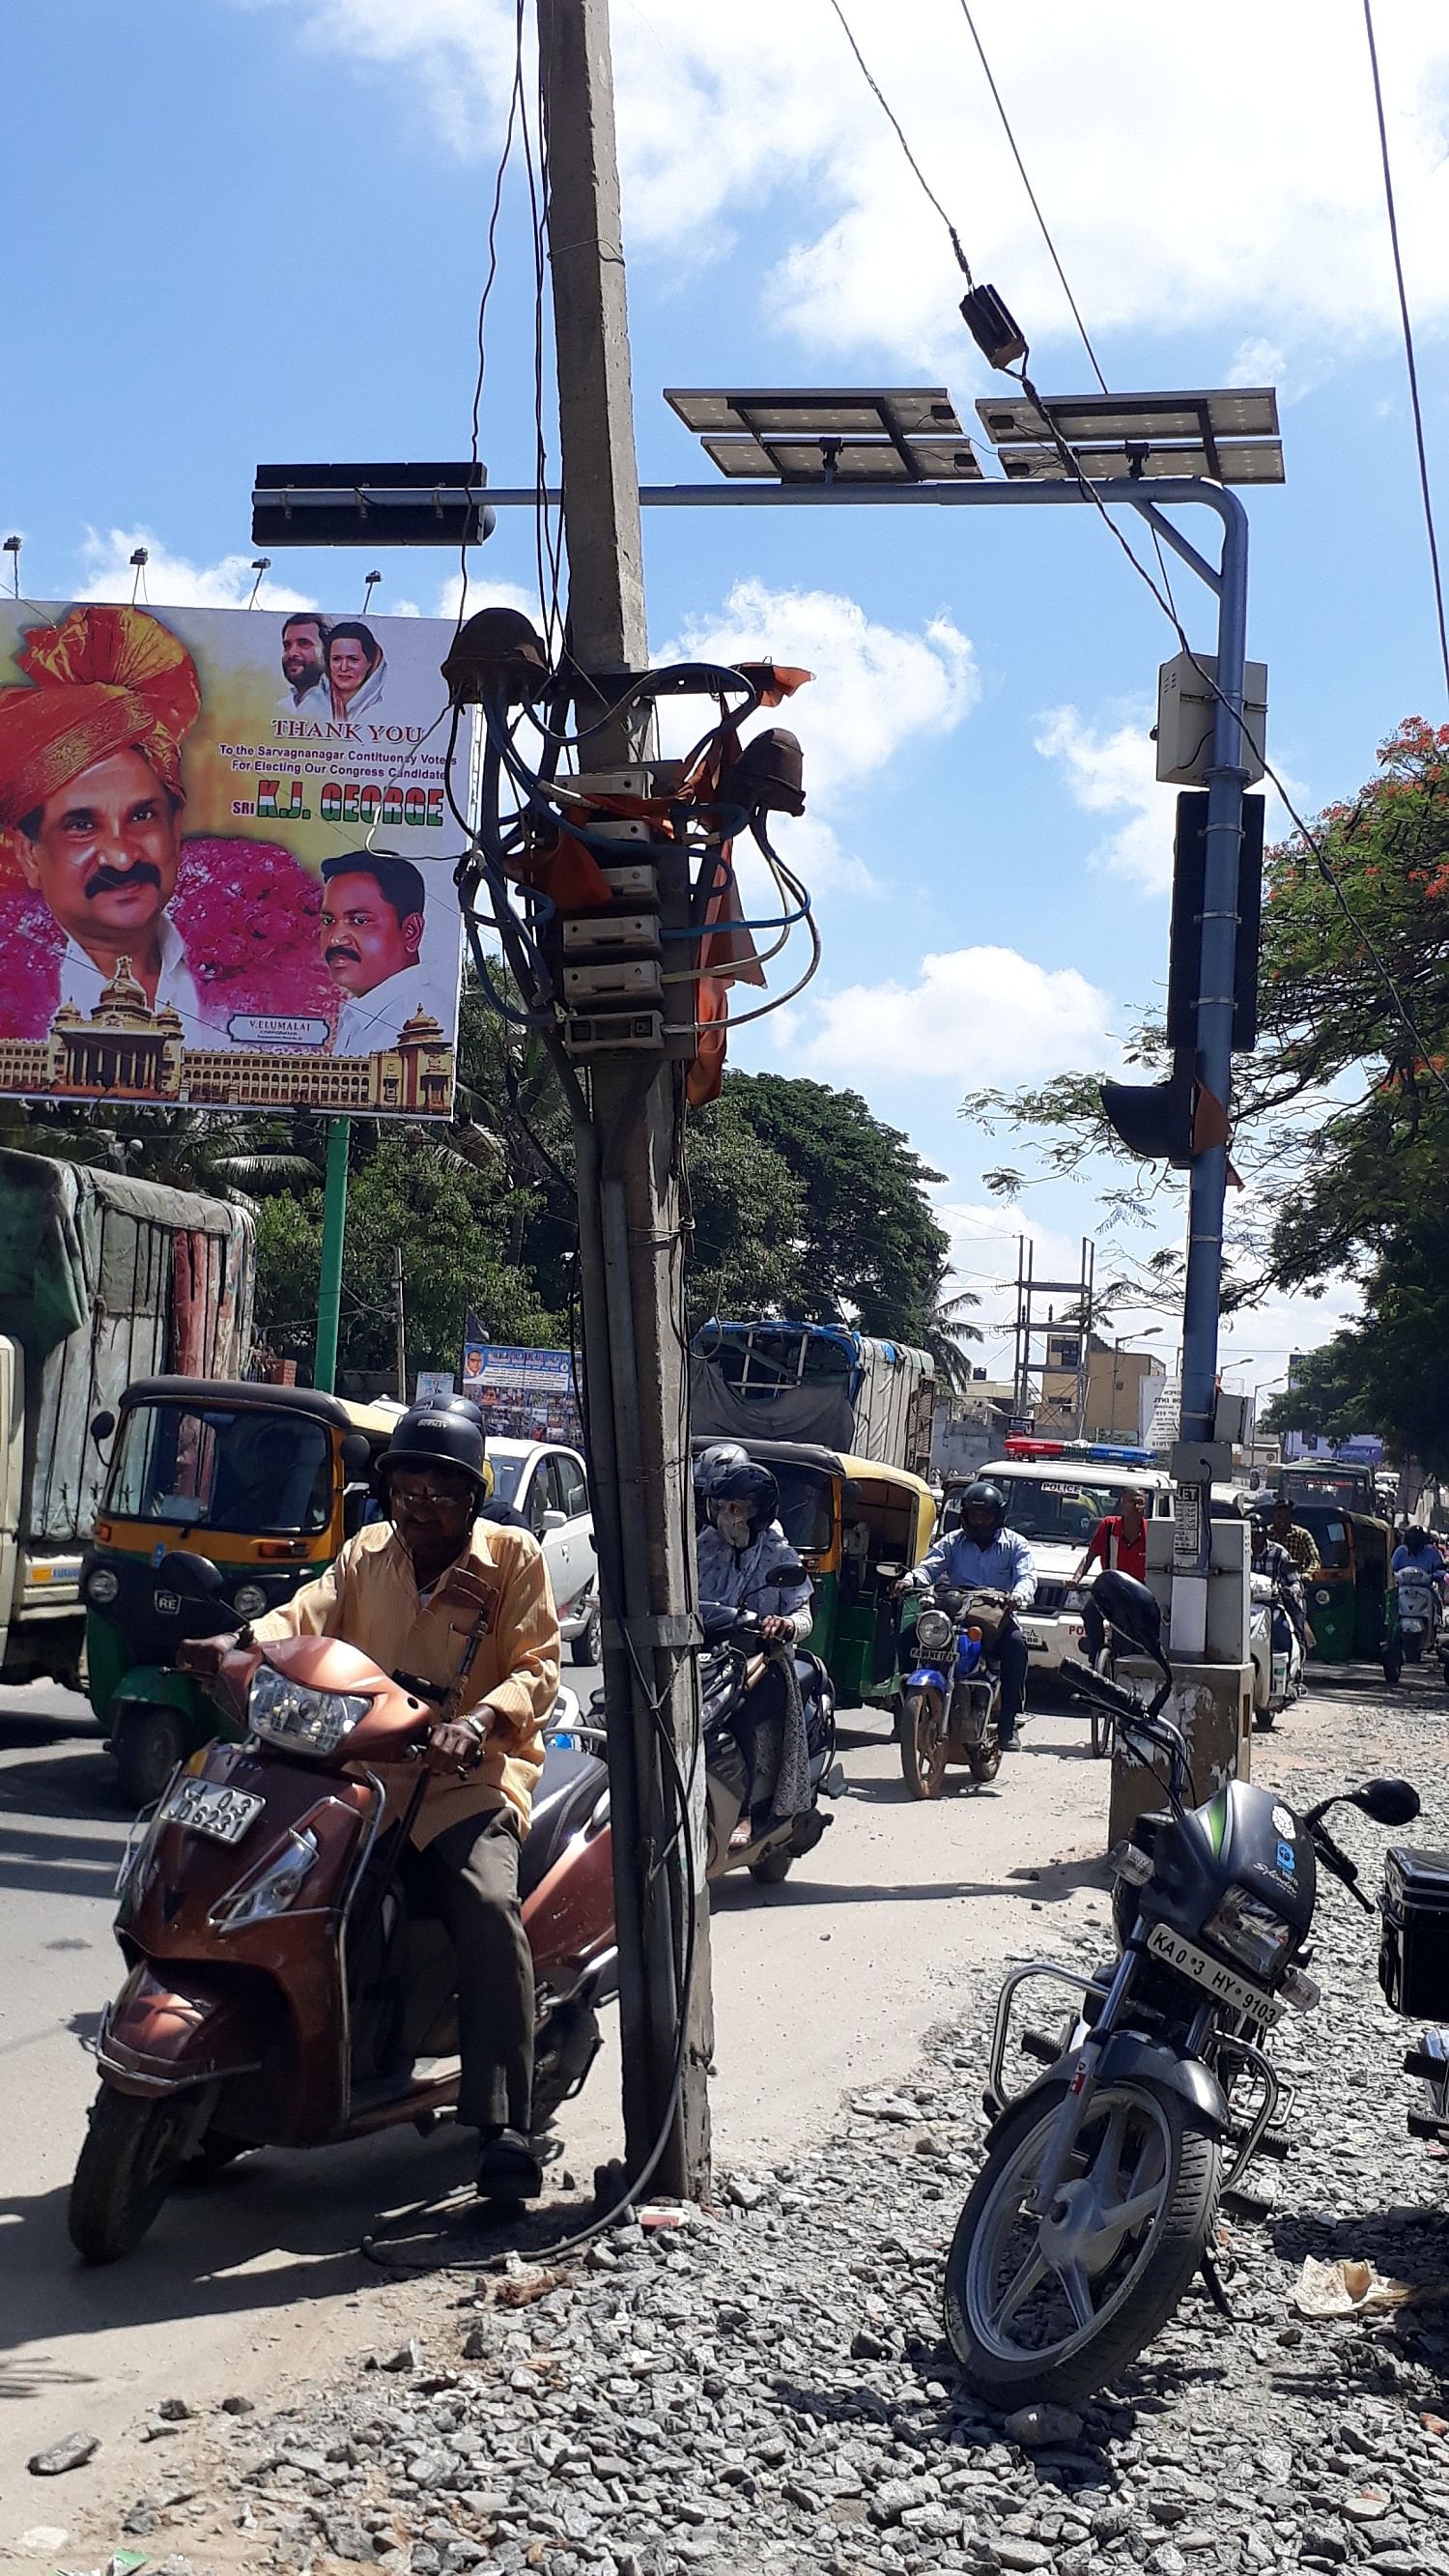 This pole in Lingararajapuramhas cables extending on to the road.